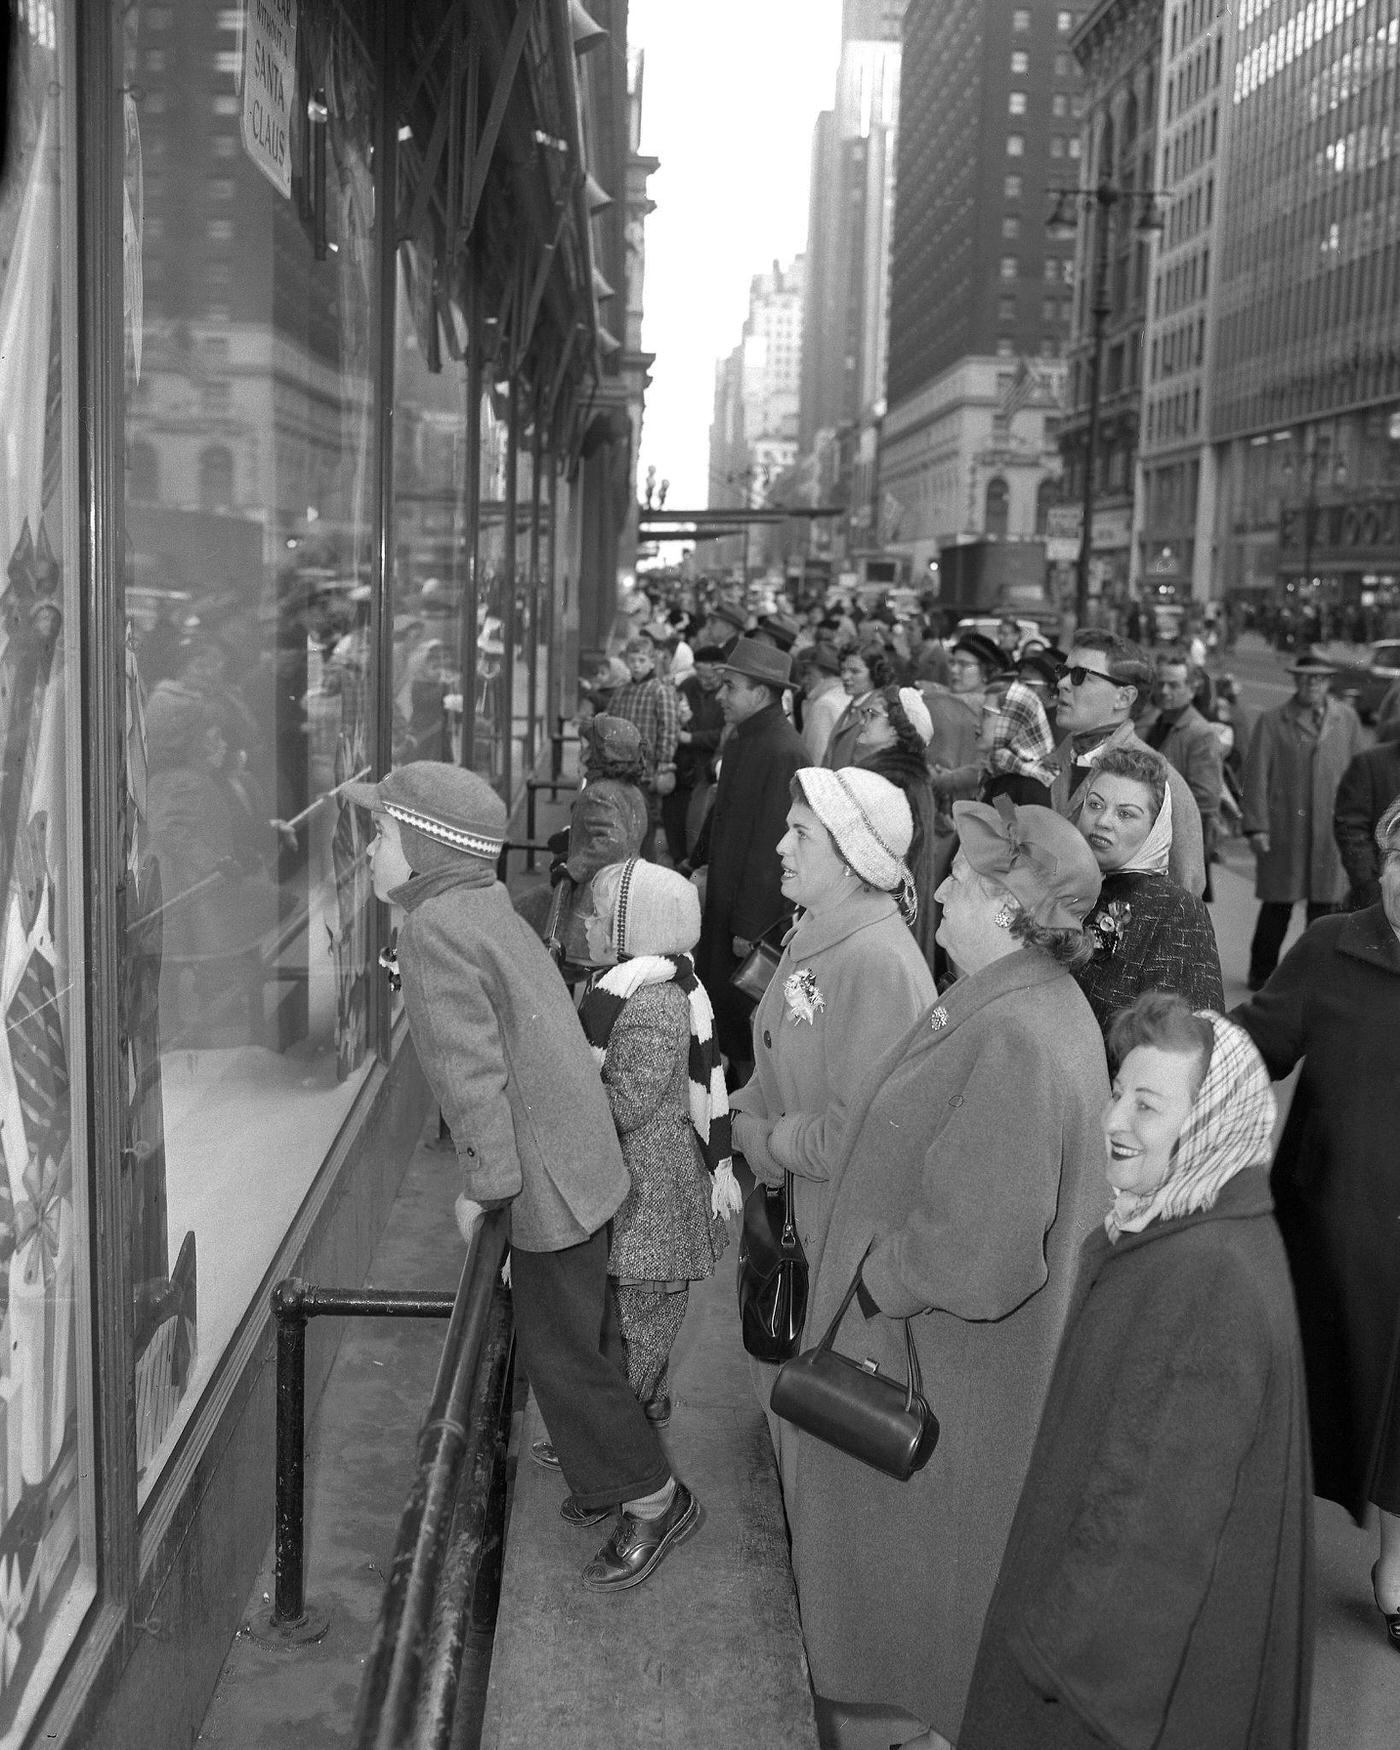 Christmas Crowds Window Shopping At Macy'S On 34Th St, Manhattan, 1955